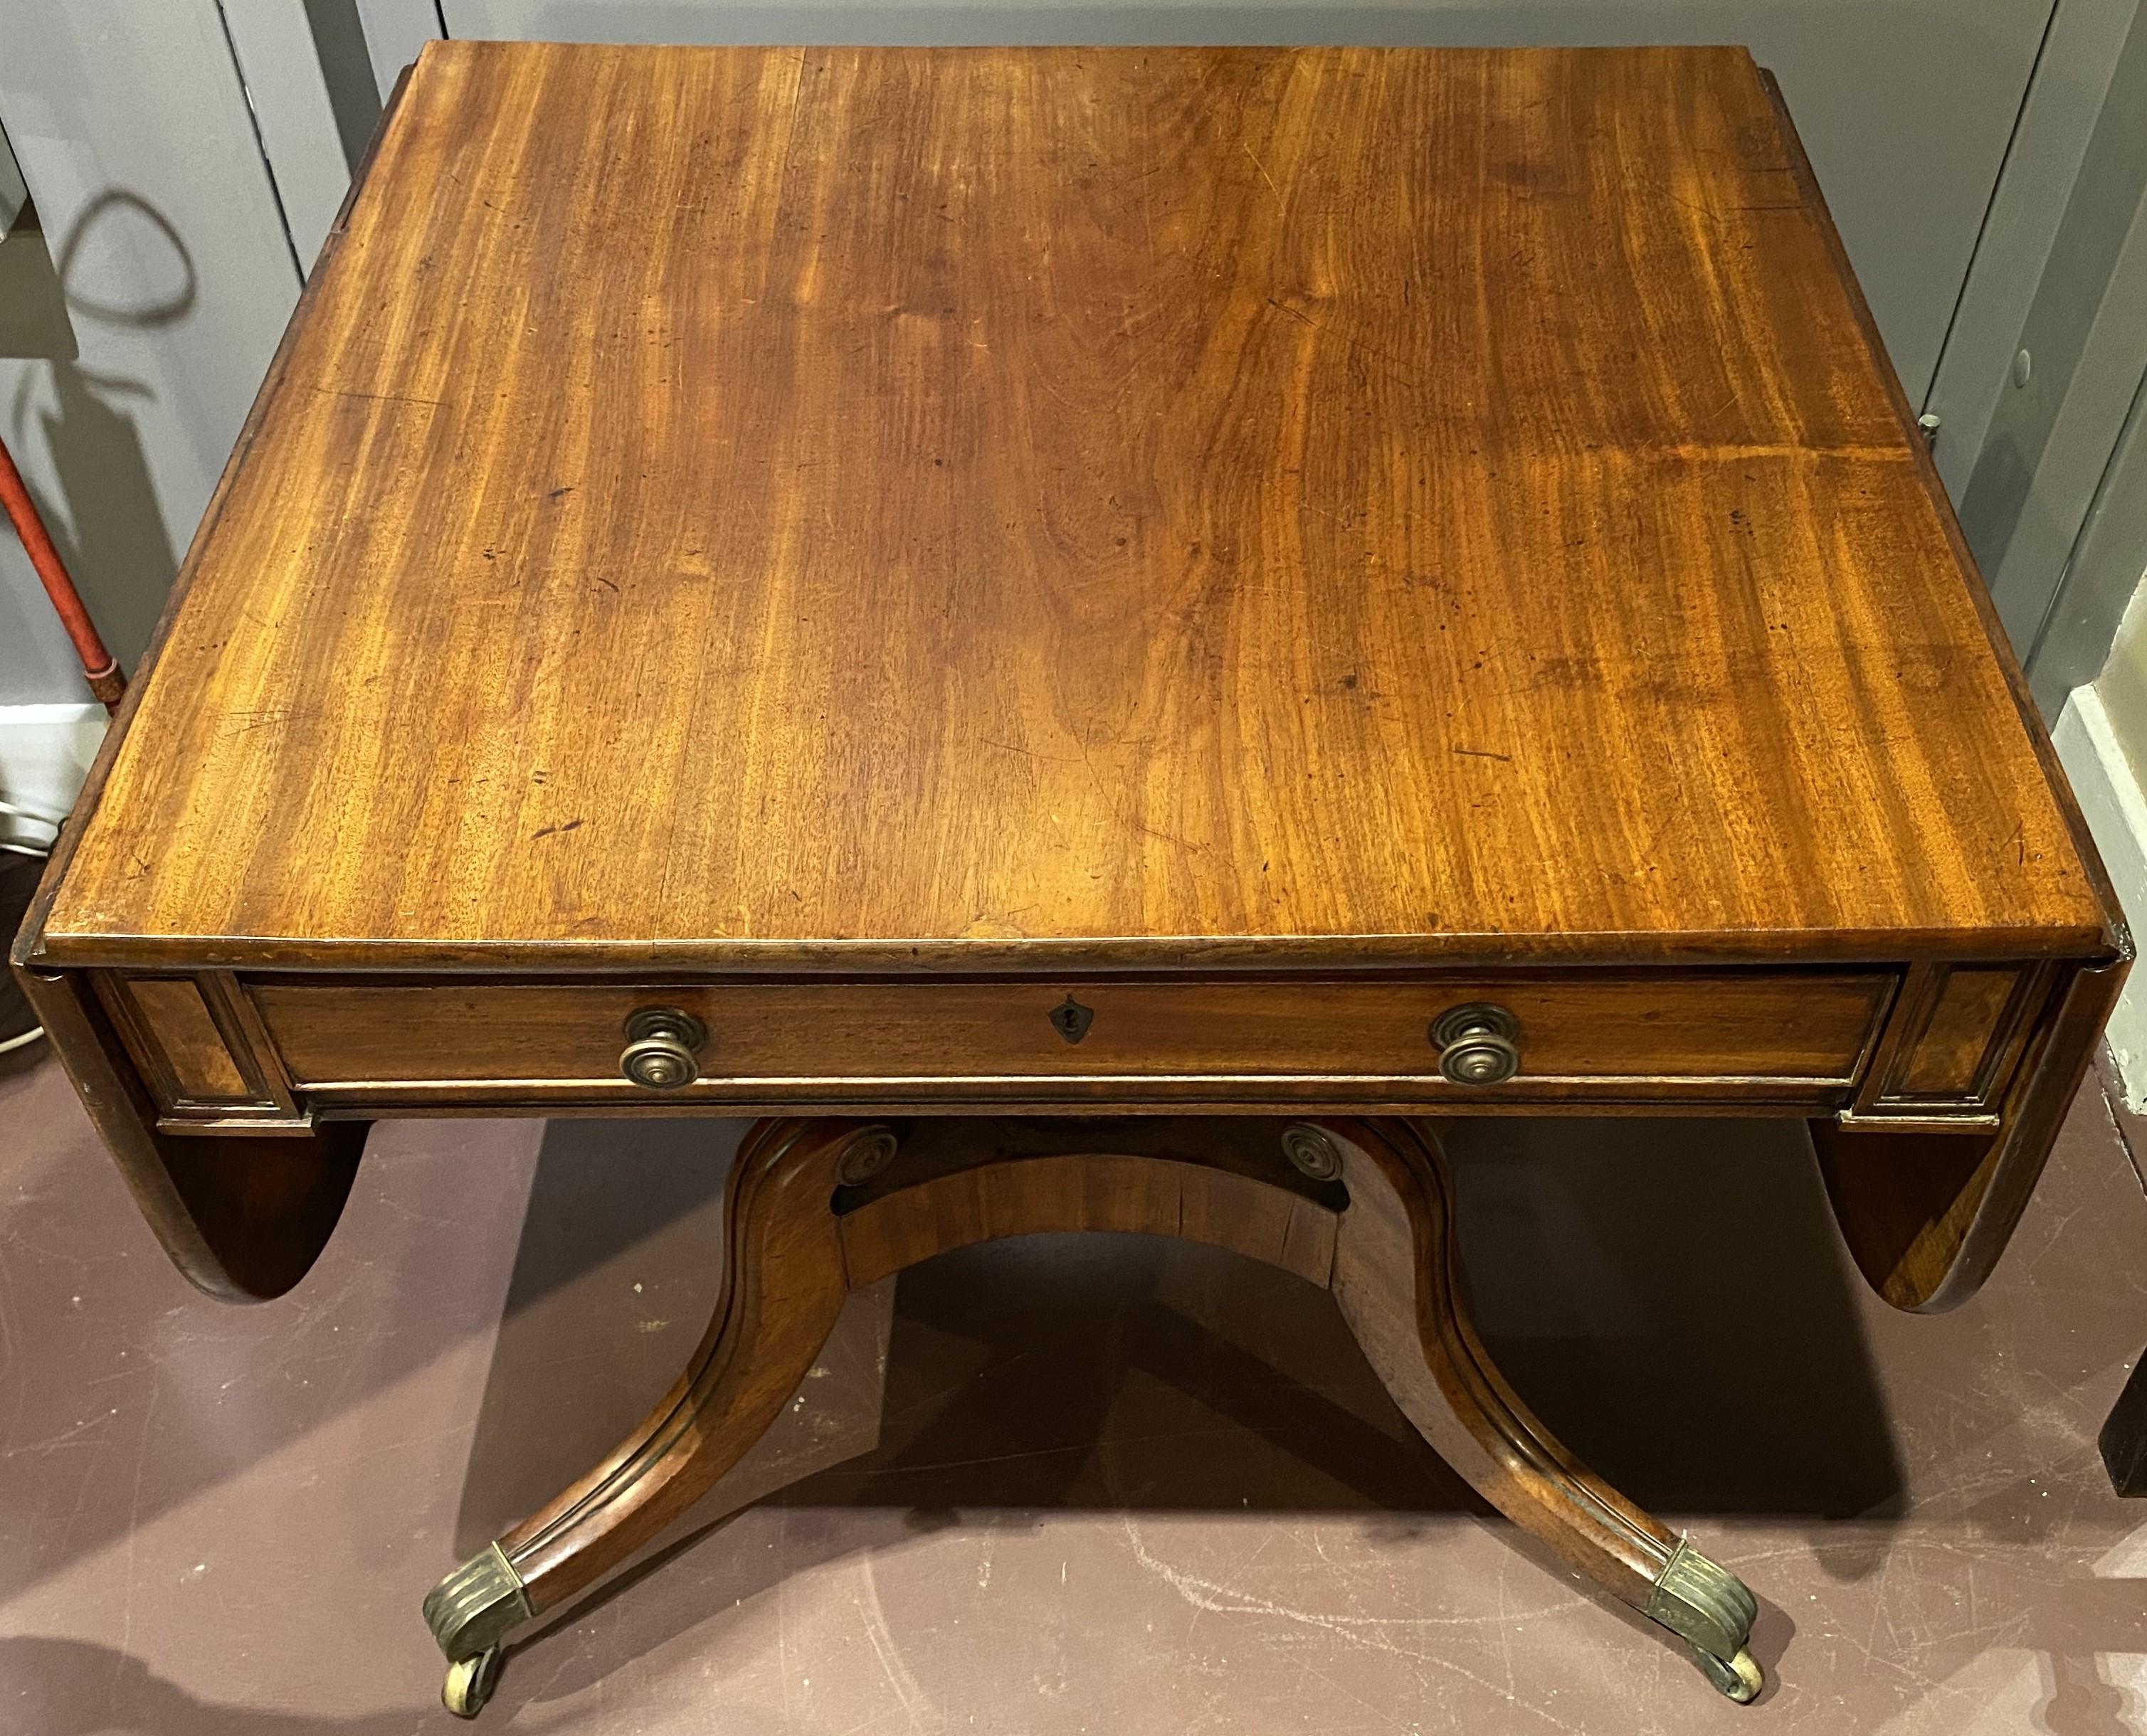 A fine example of a Georgian mahogany drop leaf table with a single frieze drawer, adorned with round brass pulls and an inlaid escutcheon, faux drawer on verso, opening to a rectangular top with rounded corners, all supported by a center turned